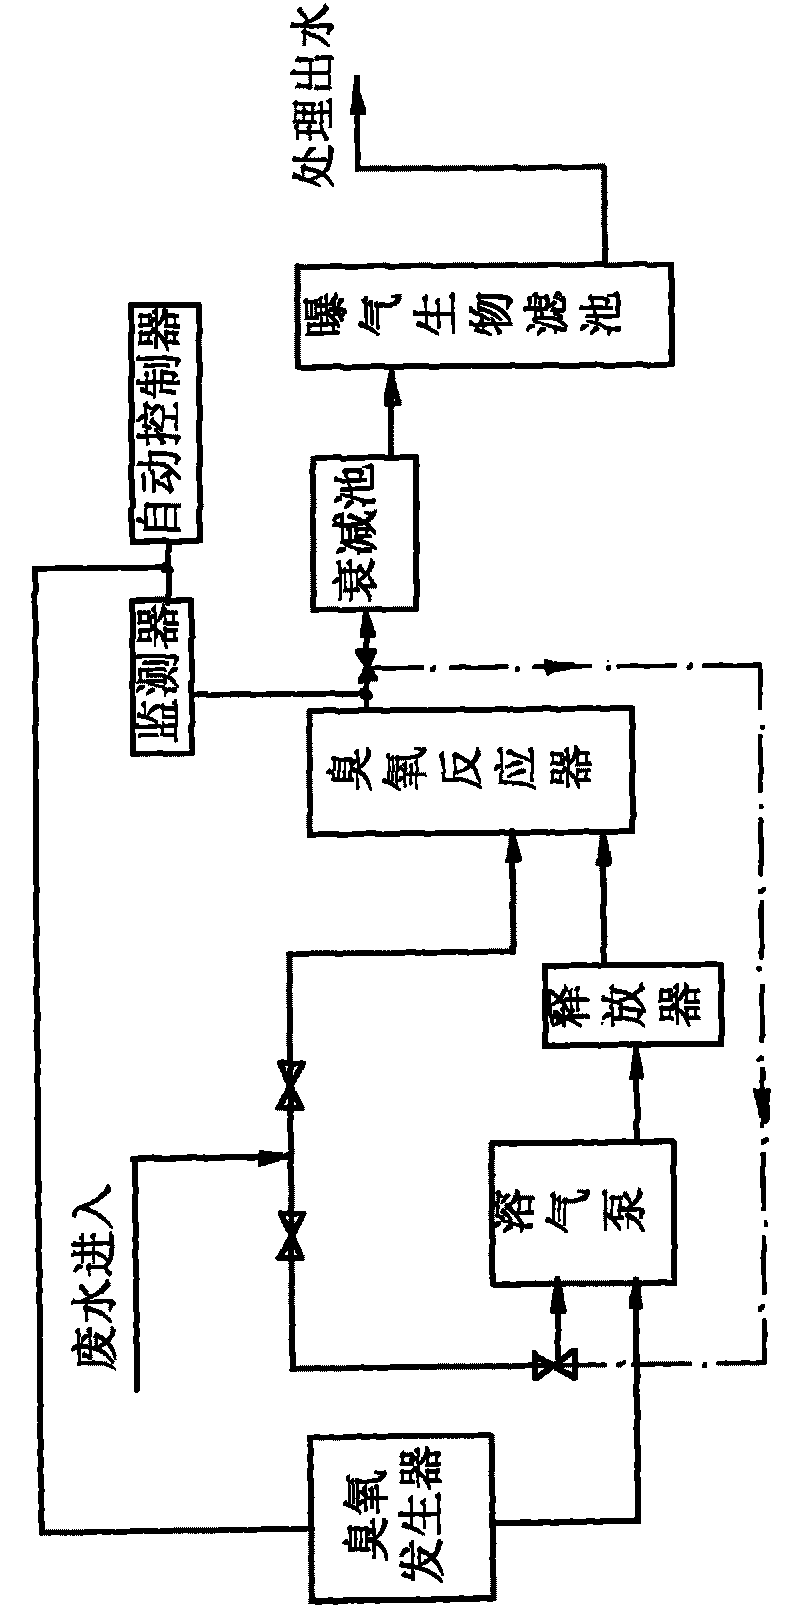 Method for increasing utilization rate of ozone jointly processing waste water with biological aerated filter